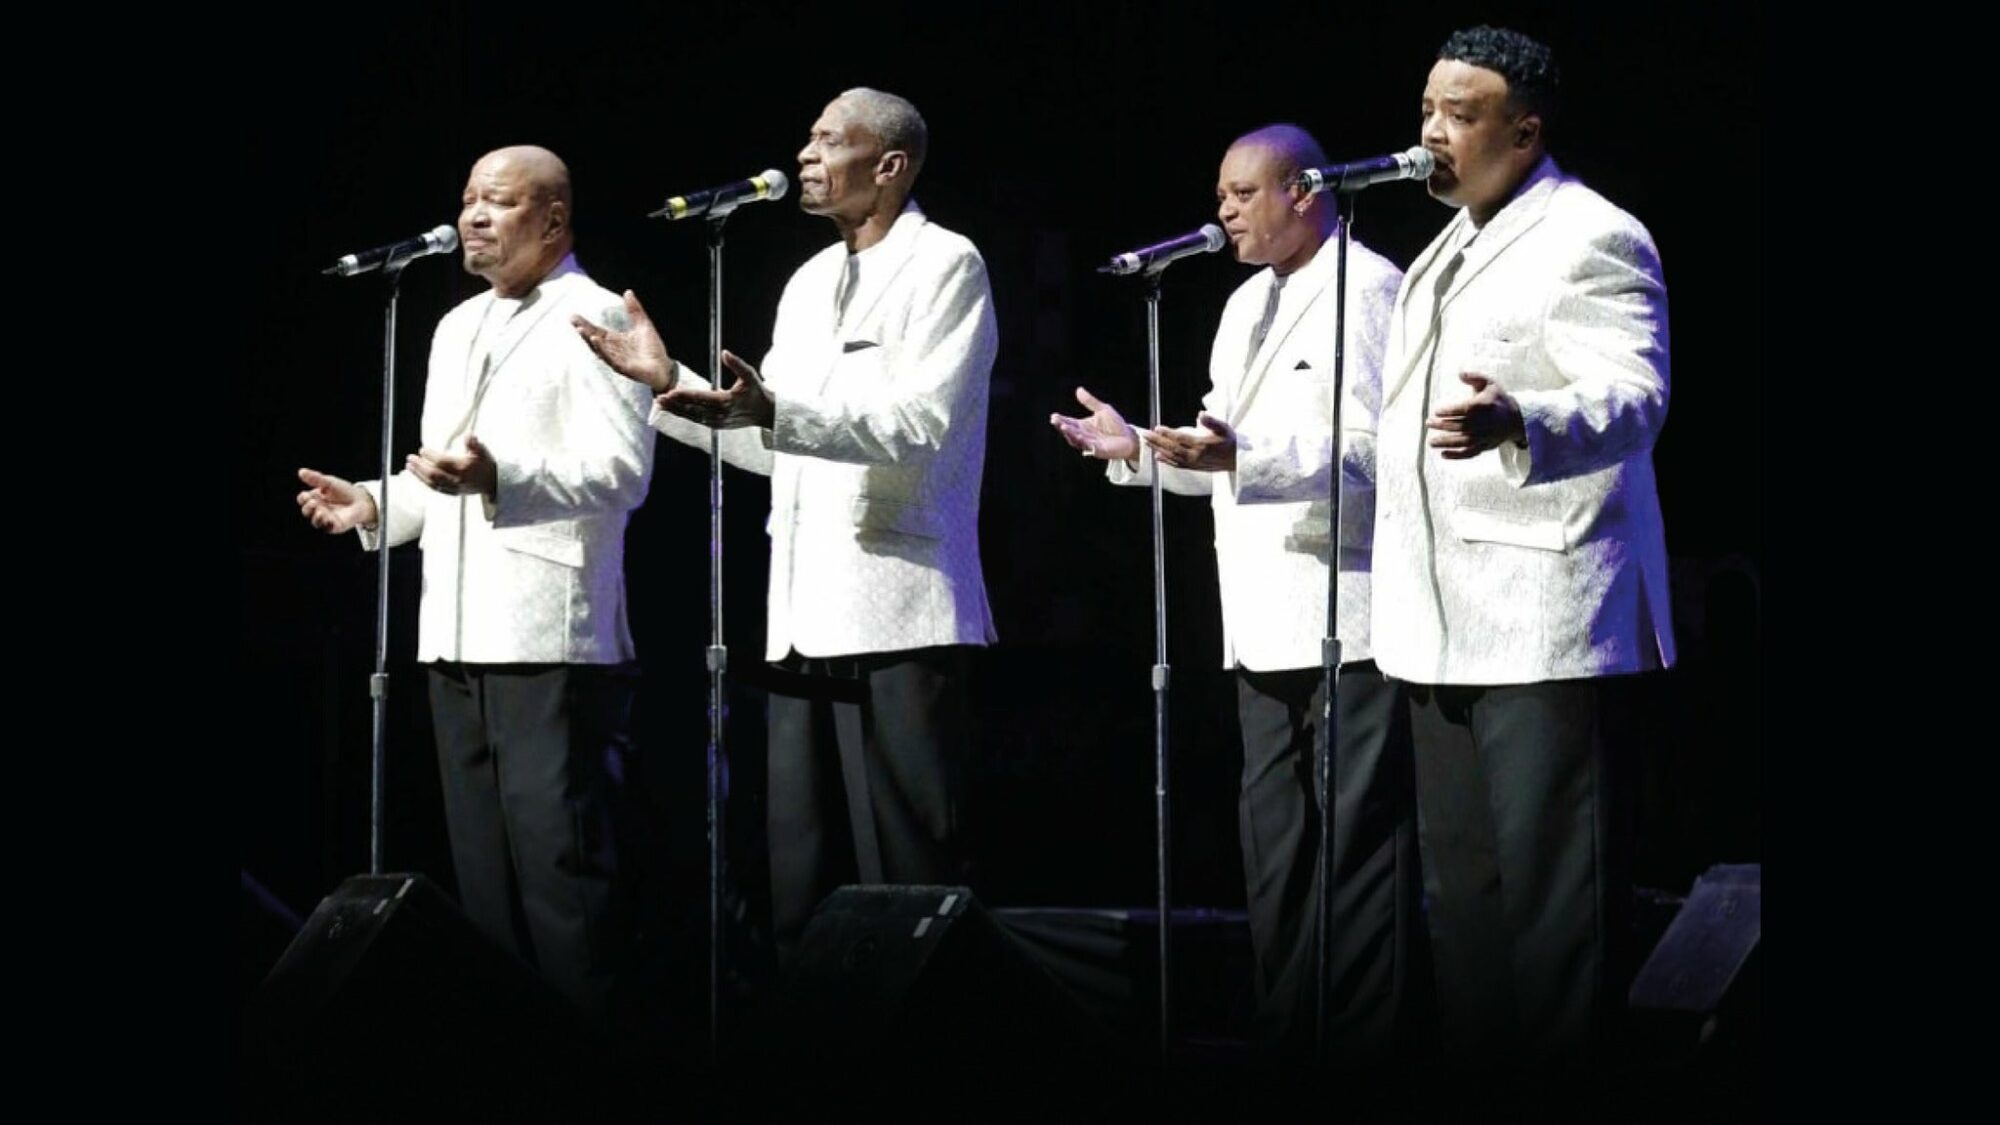 Image name The Stylistics at Sheffield City Hall Oval Hall Sheffield the 5 image from the post Events in Yorkshire.com.